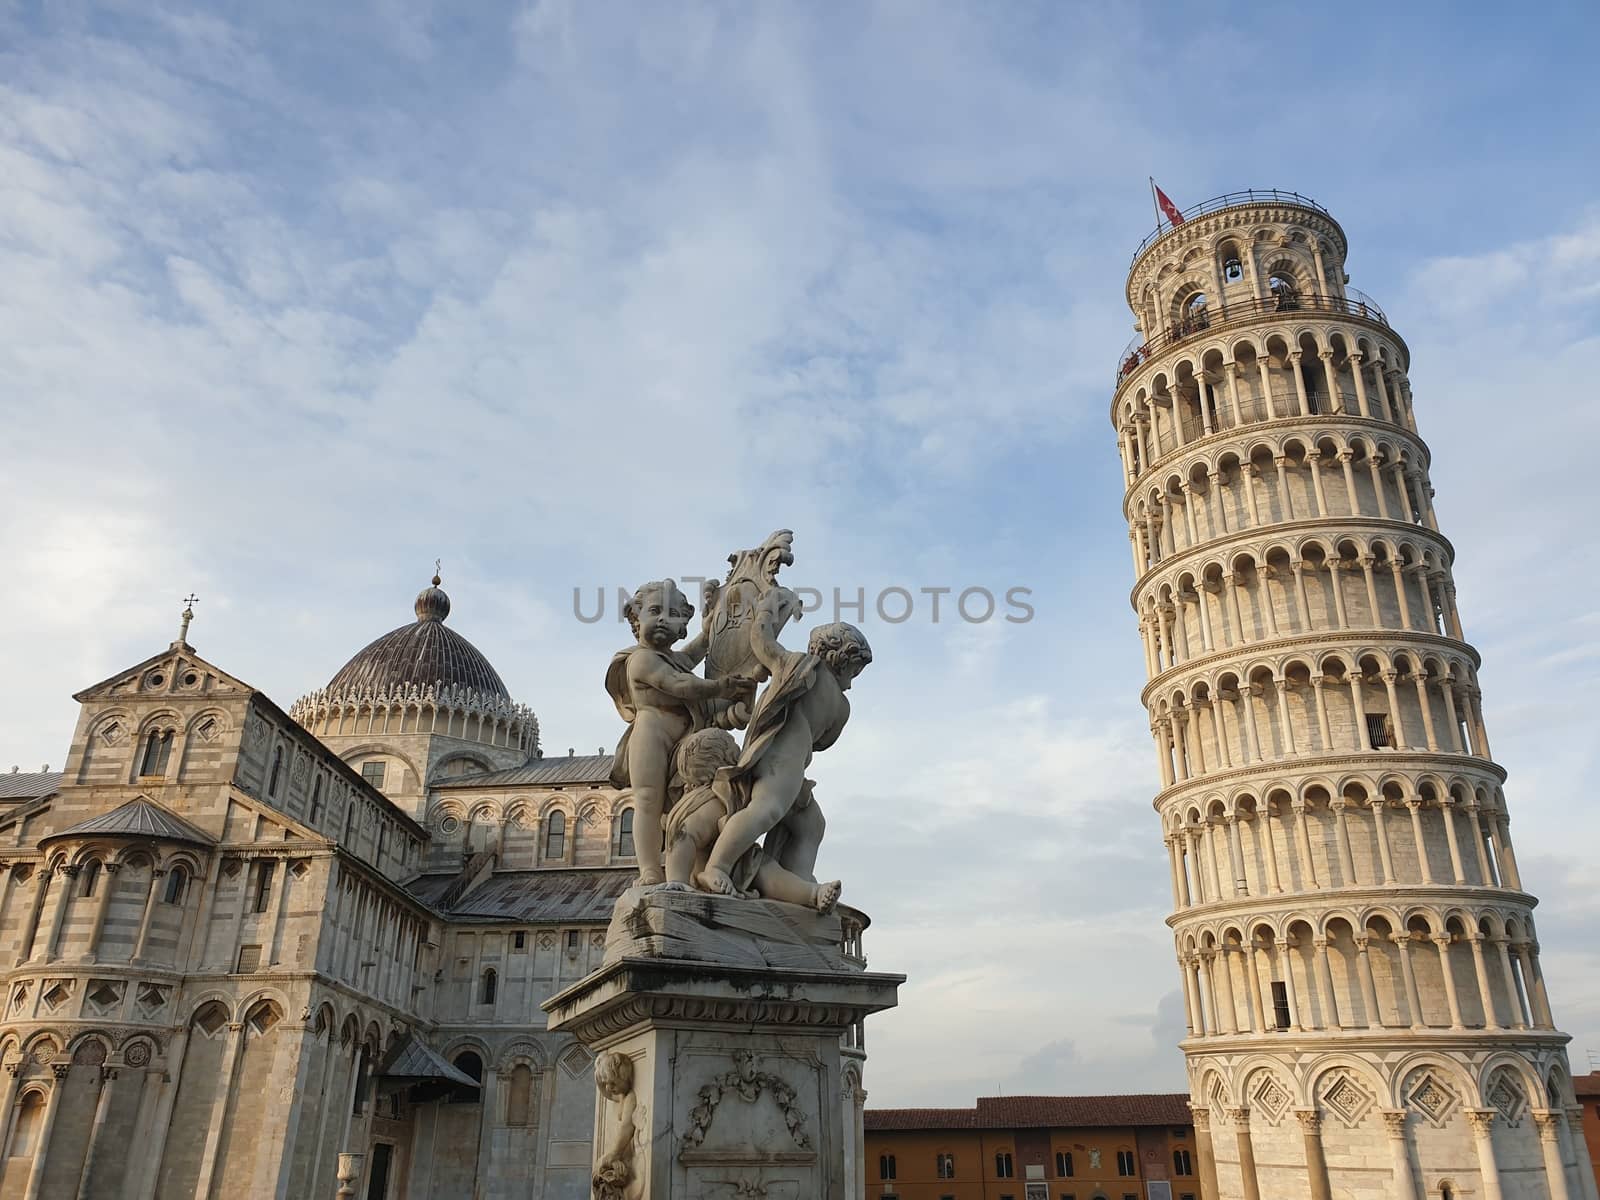 The leaning tower of Pisa and Piazza dei Miracoli in a sunny day - The Miracle Square, the Leaning Tower and the Cathedral is visited everyday by thousand of tourists - Pisa, Tuscany, Italy